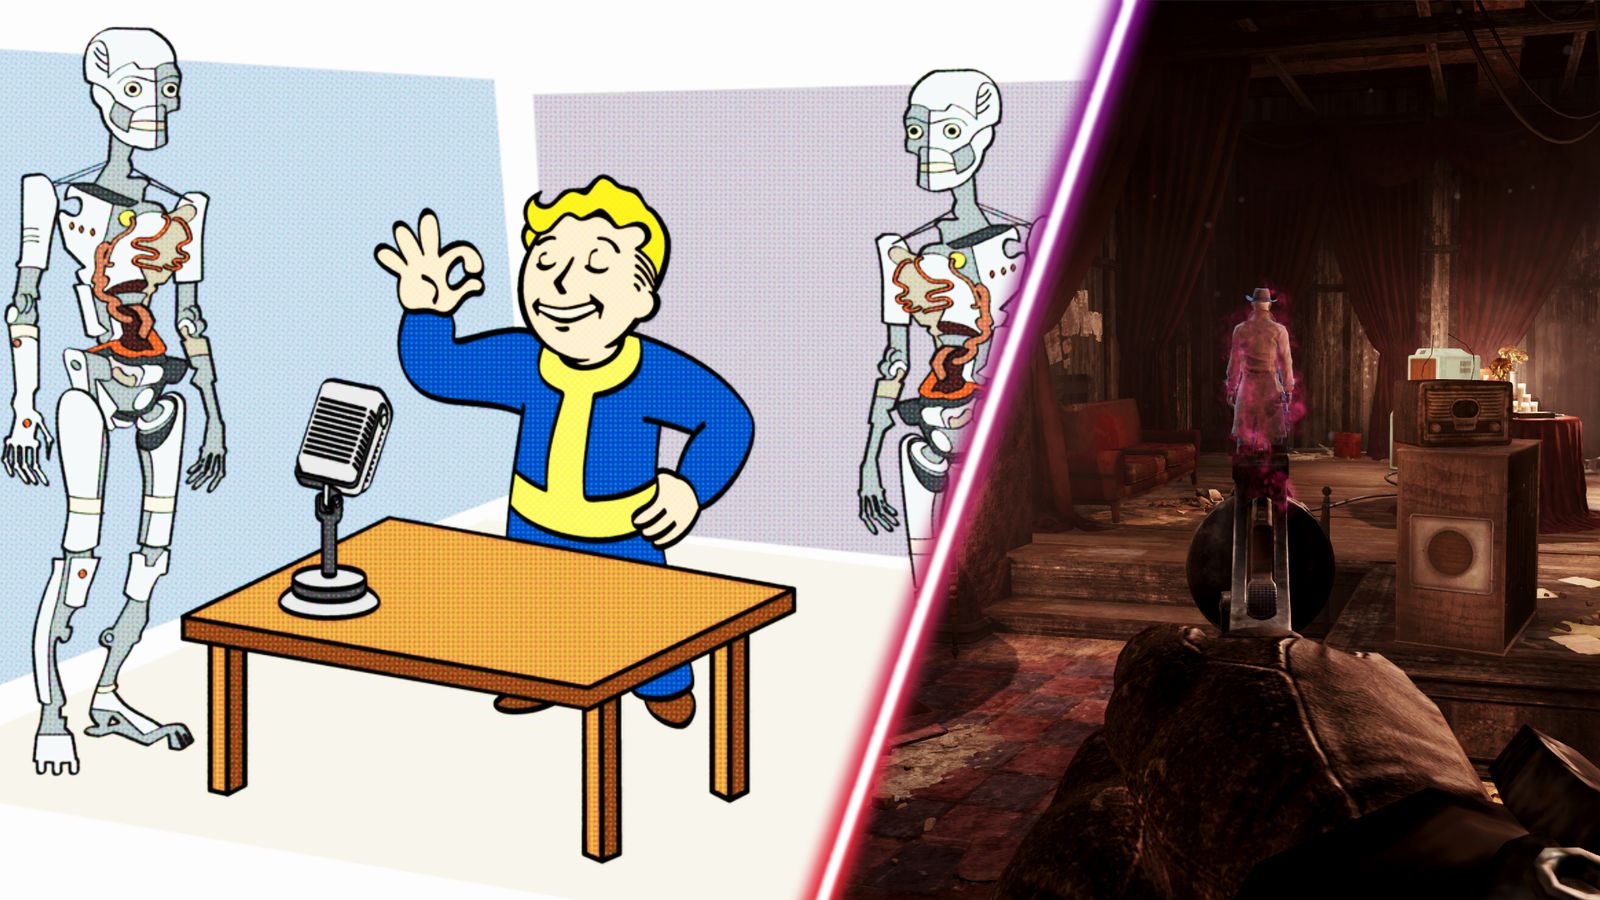 Fallout 4's Vault Boy alongside some synths.